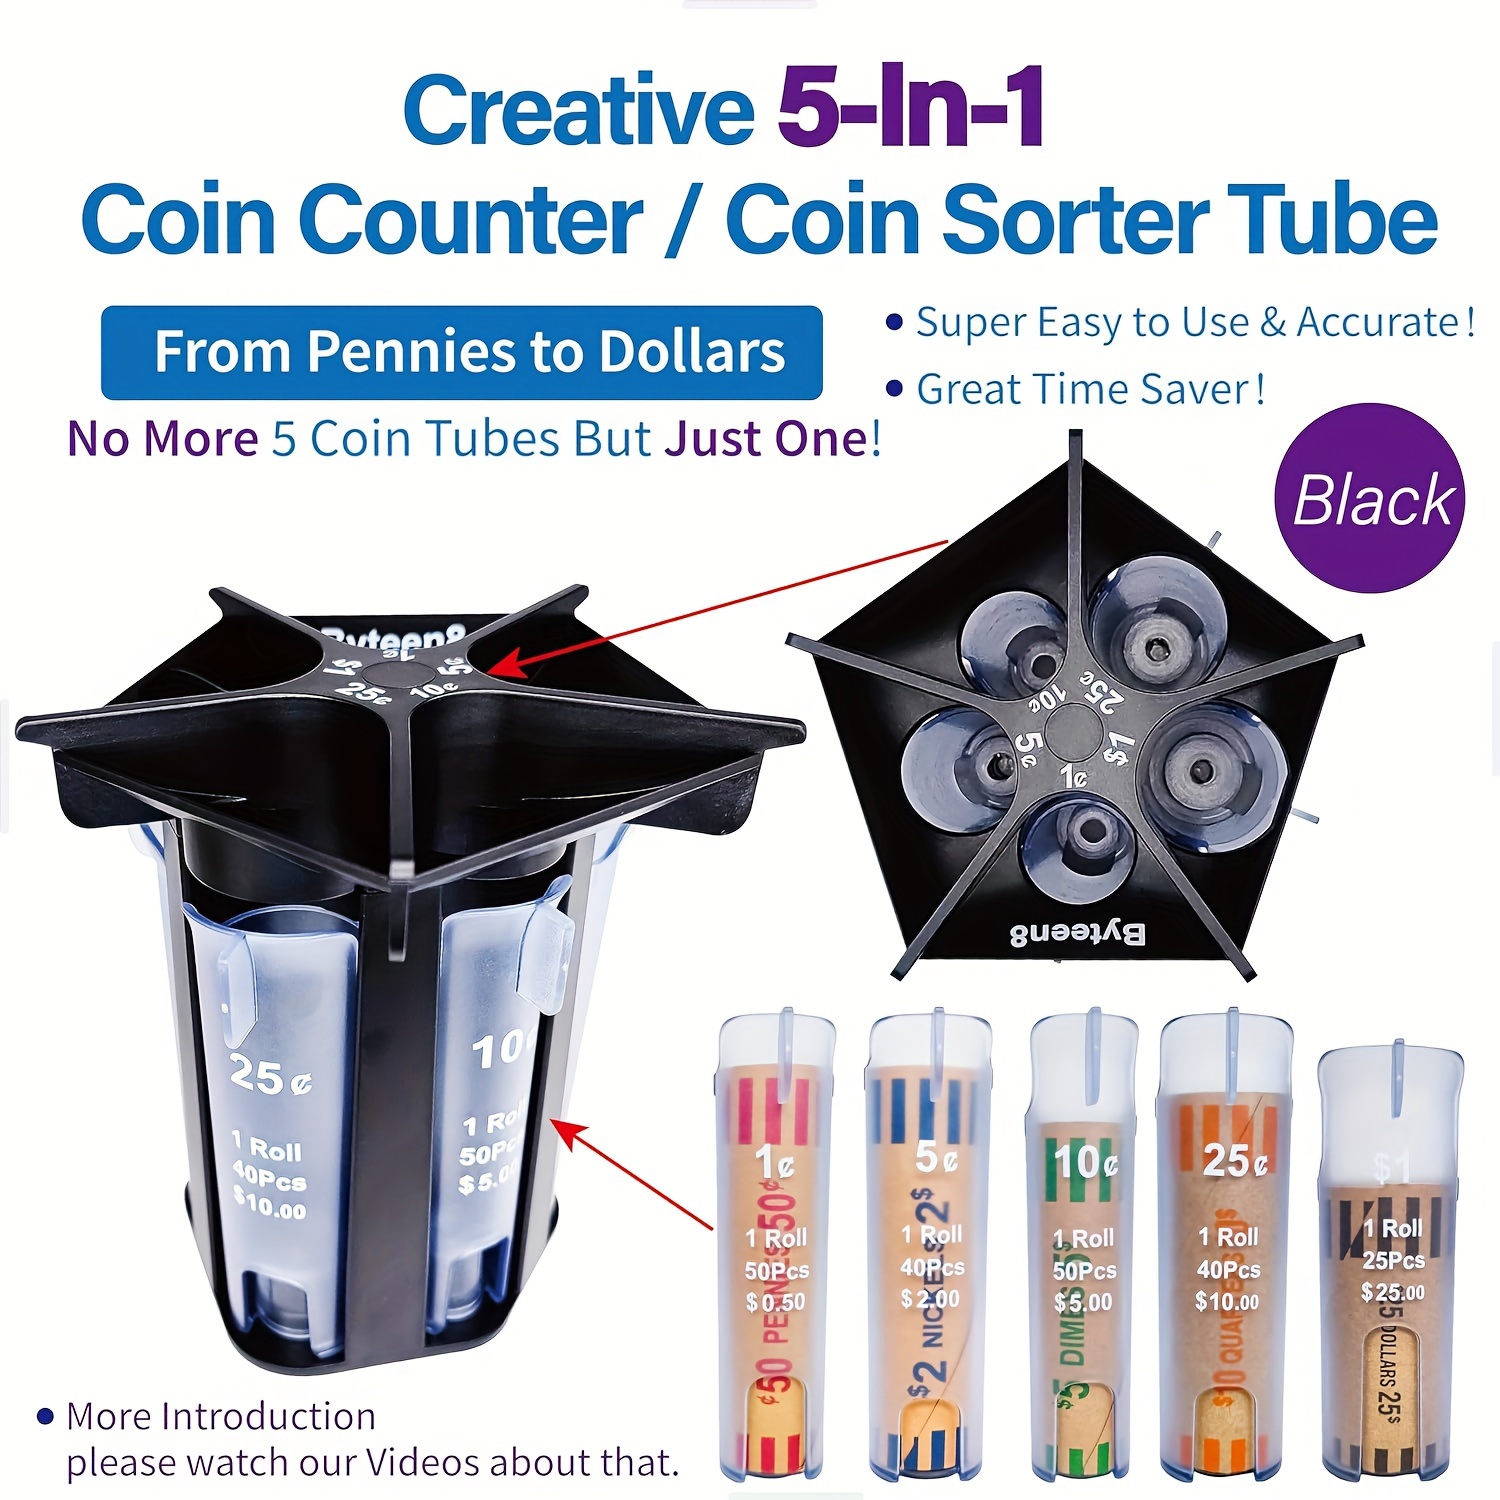 

1pc 5-in-1 Coin Sorter And Storage Container, Black Plastic Coin Counting Tube, Portable Money Organizer – Holds $0.01 To $1 Coins, Easy Roll Wrapping